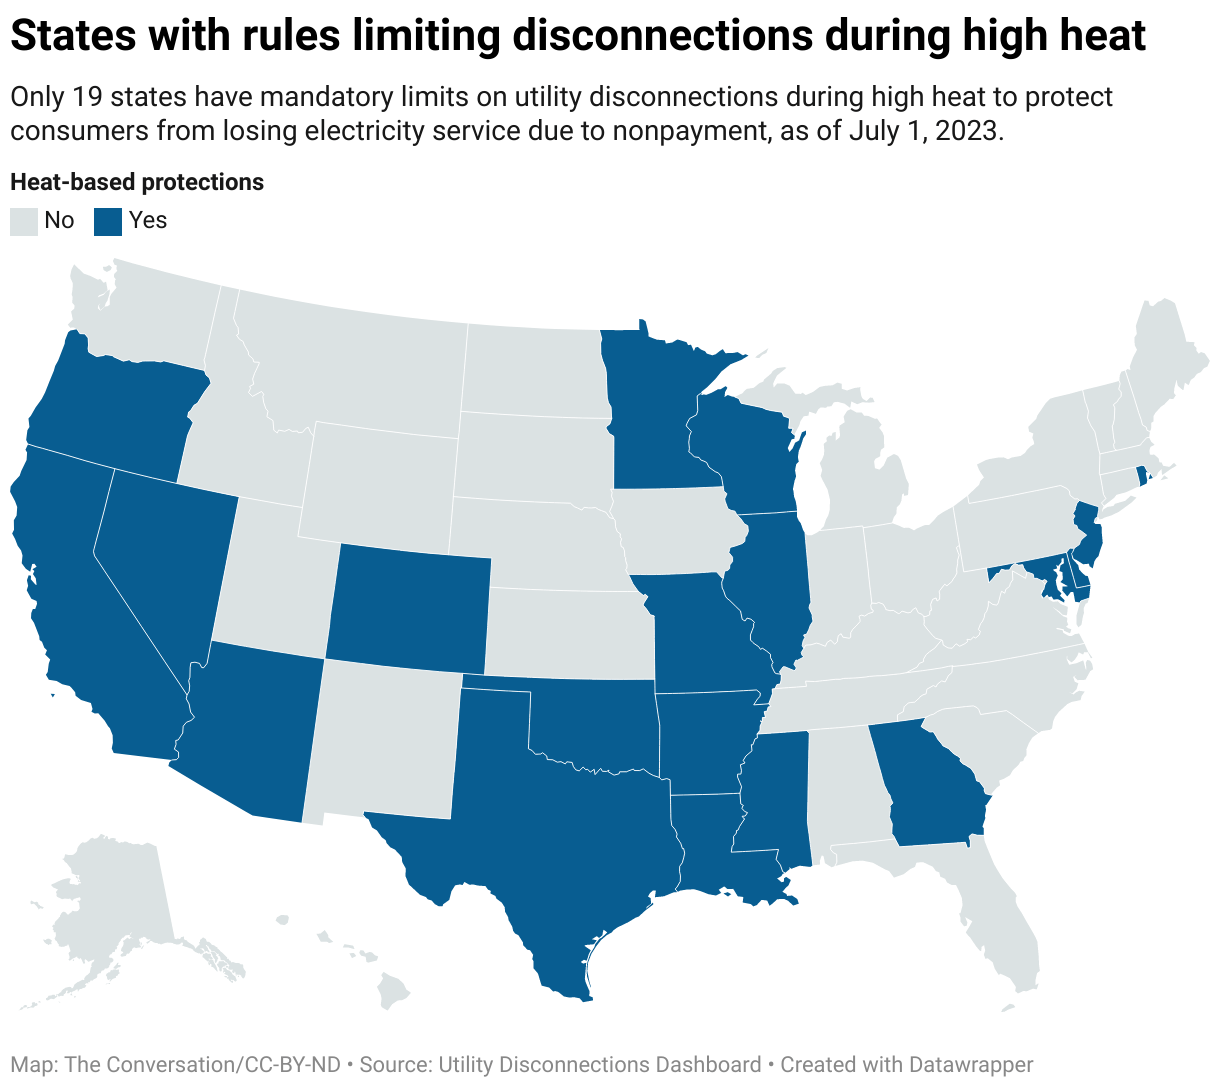 America’s power disconnection crisis: In 31 states, including Kentucky, utilities can shut off electricity for nonpayment in a heat wave